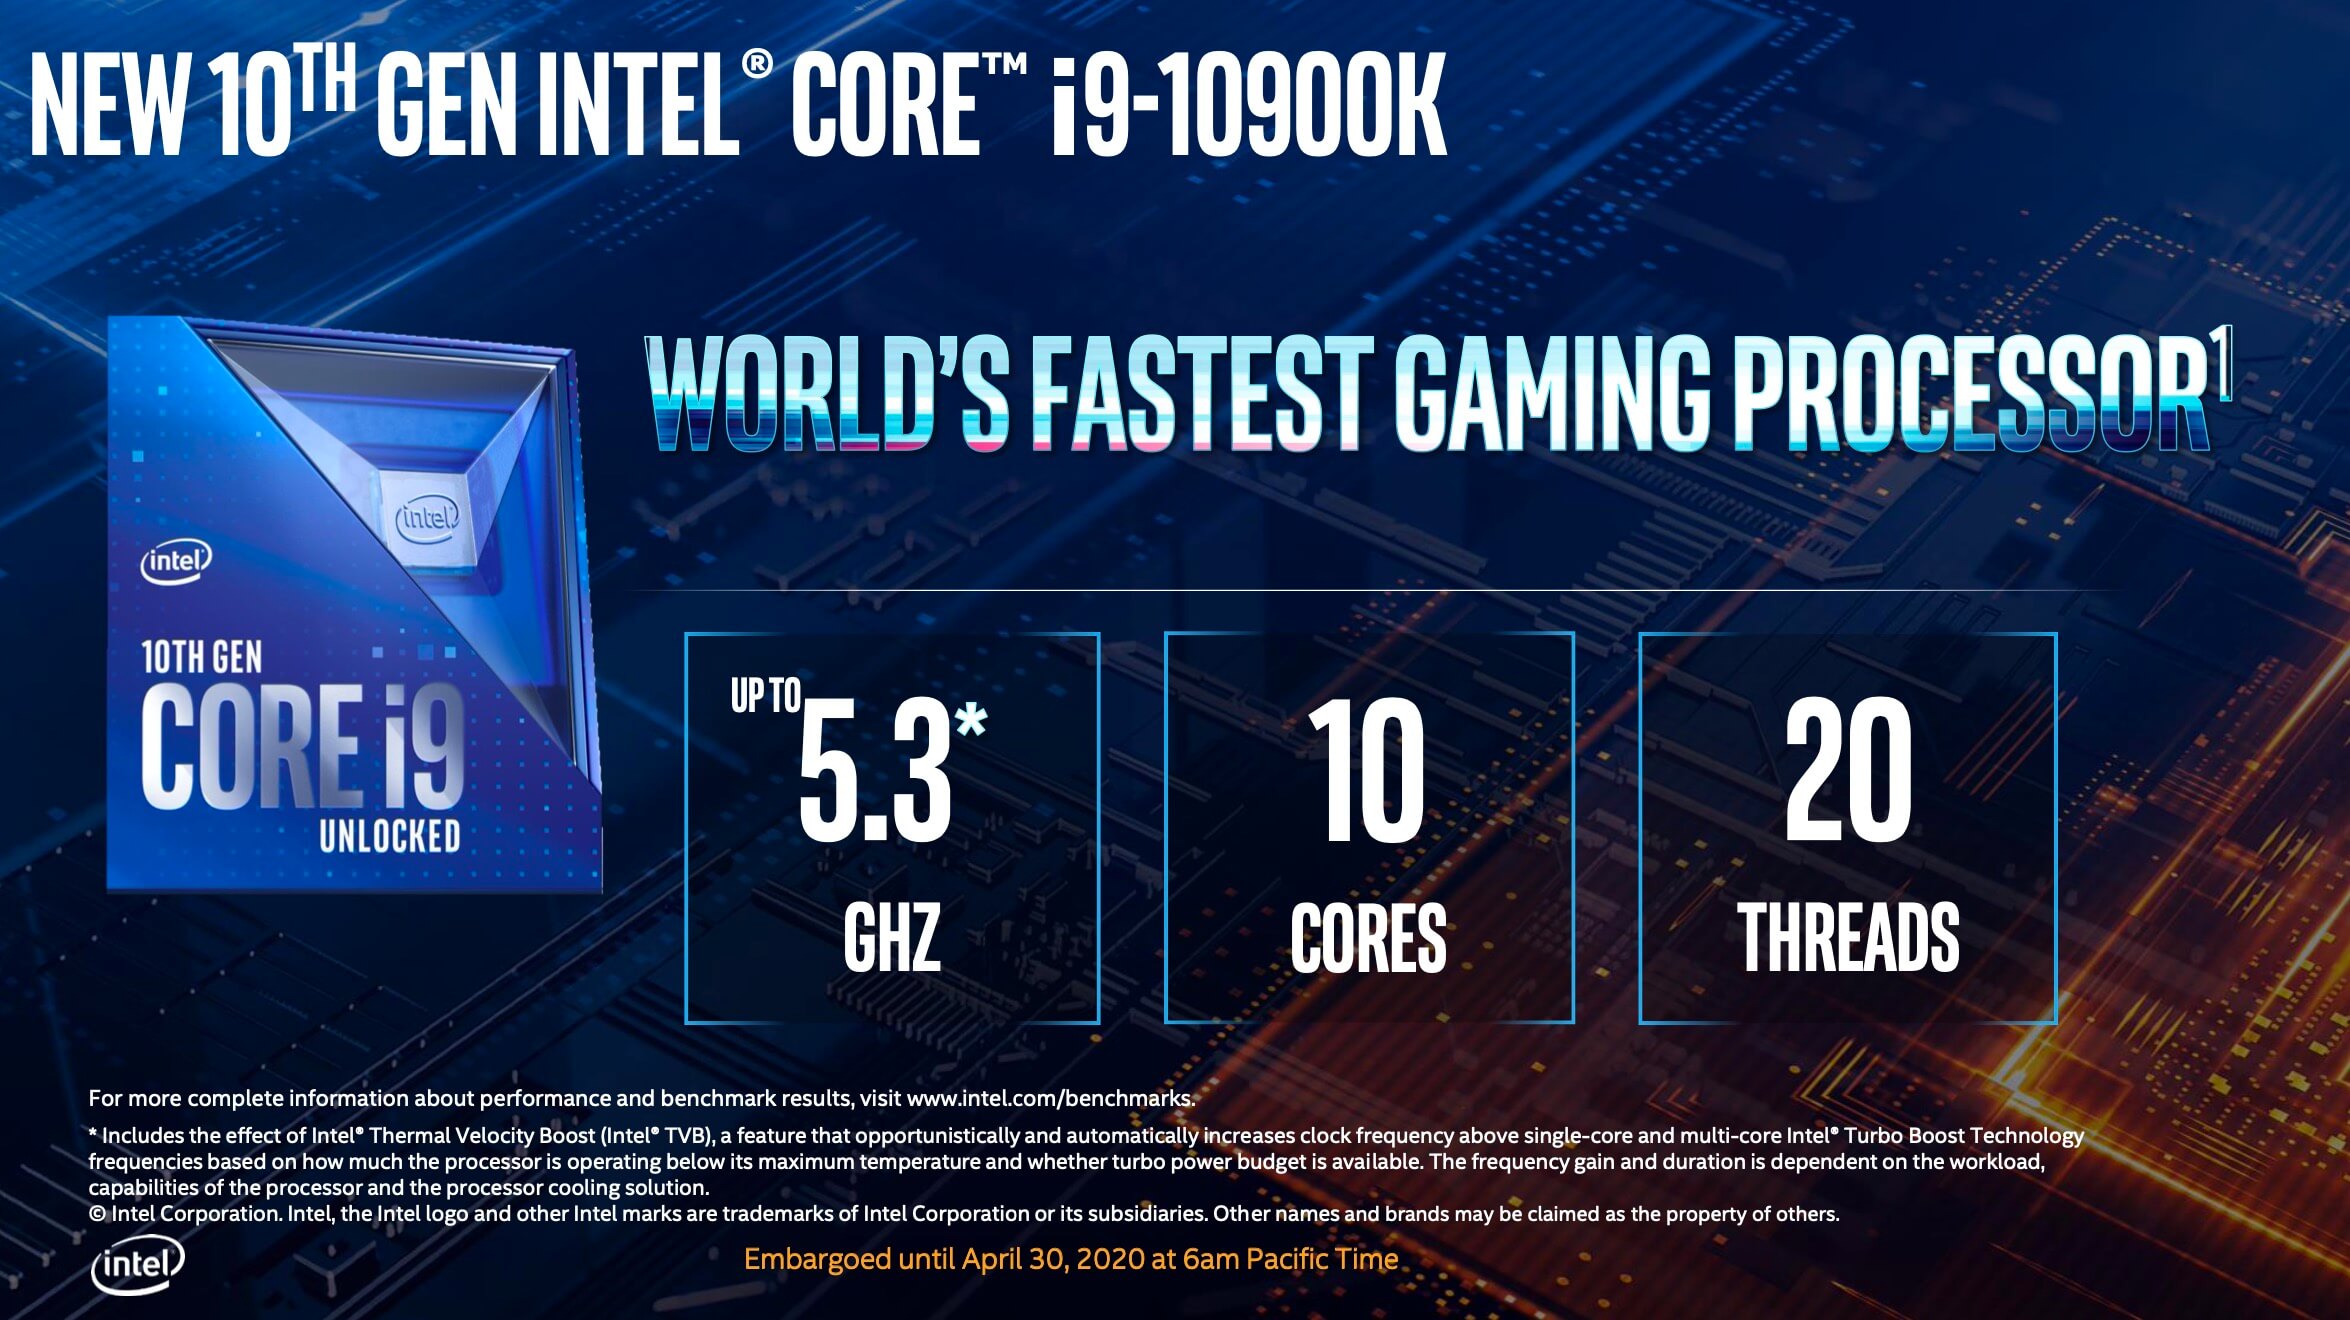 Intel Core i9-10900K is official, boosting up to 5.3 GHz; Core i7